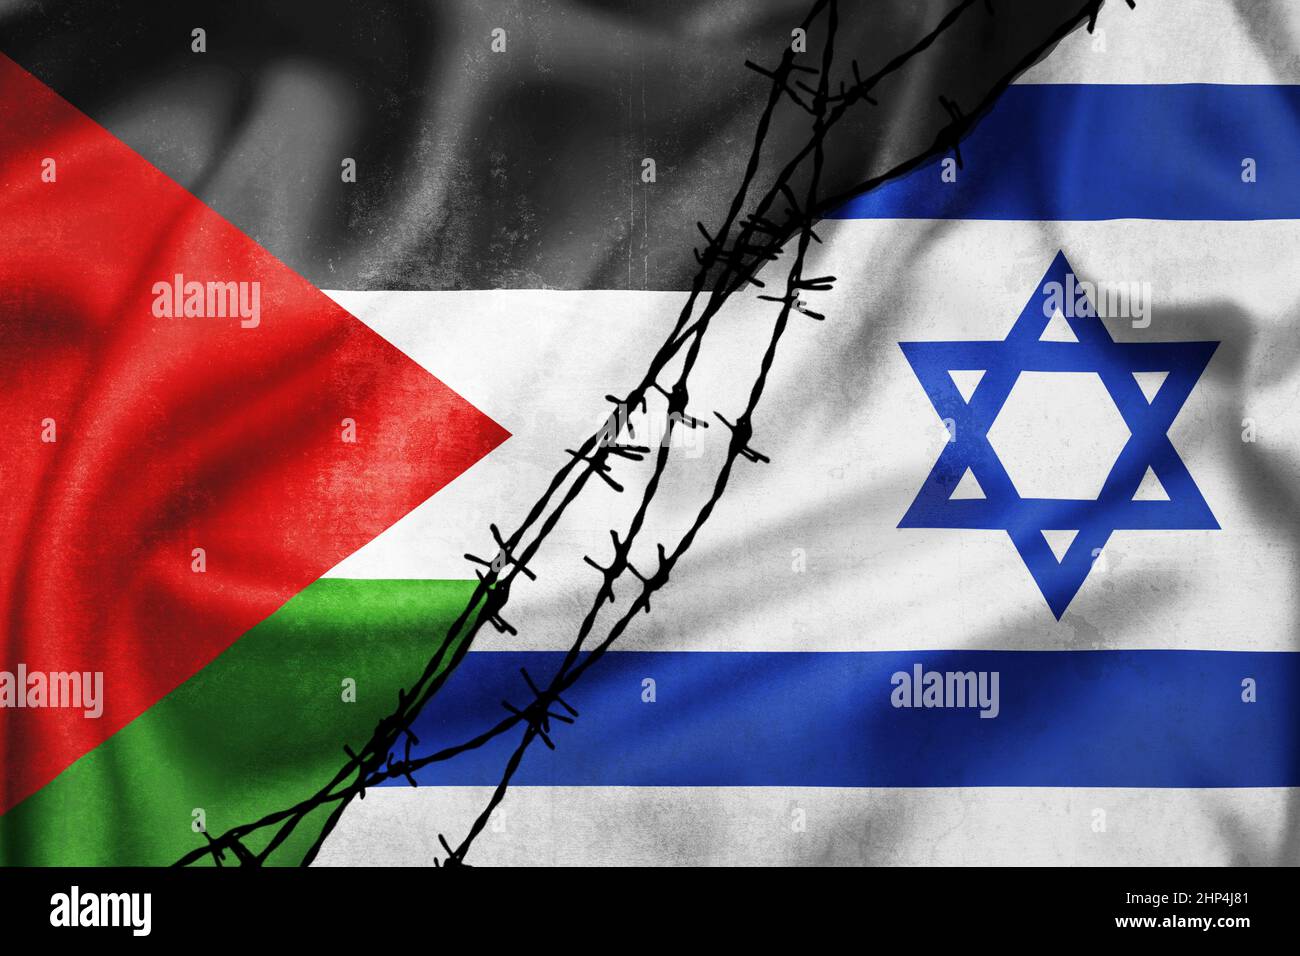 Grunge flags of Palestine and Israel divided by barb wire illustration, concept of tense relations between Palestine and Israel Stock Photo